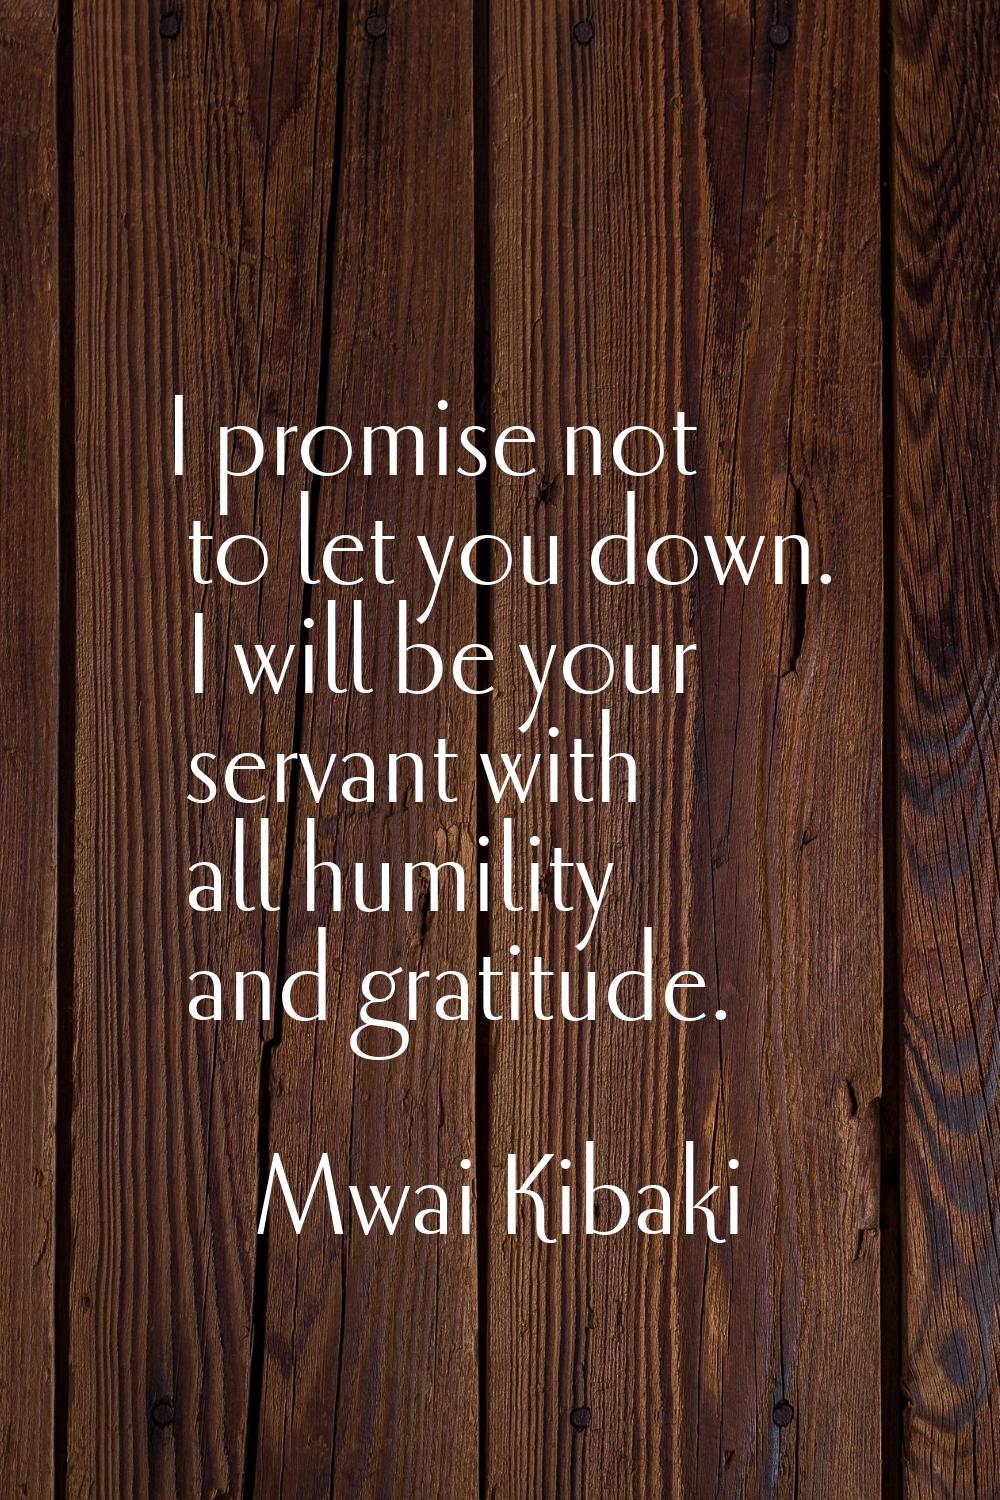 I promise not to let you down. I will be your servant with all humility and gratitude.